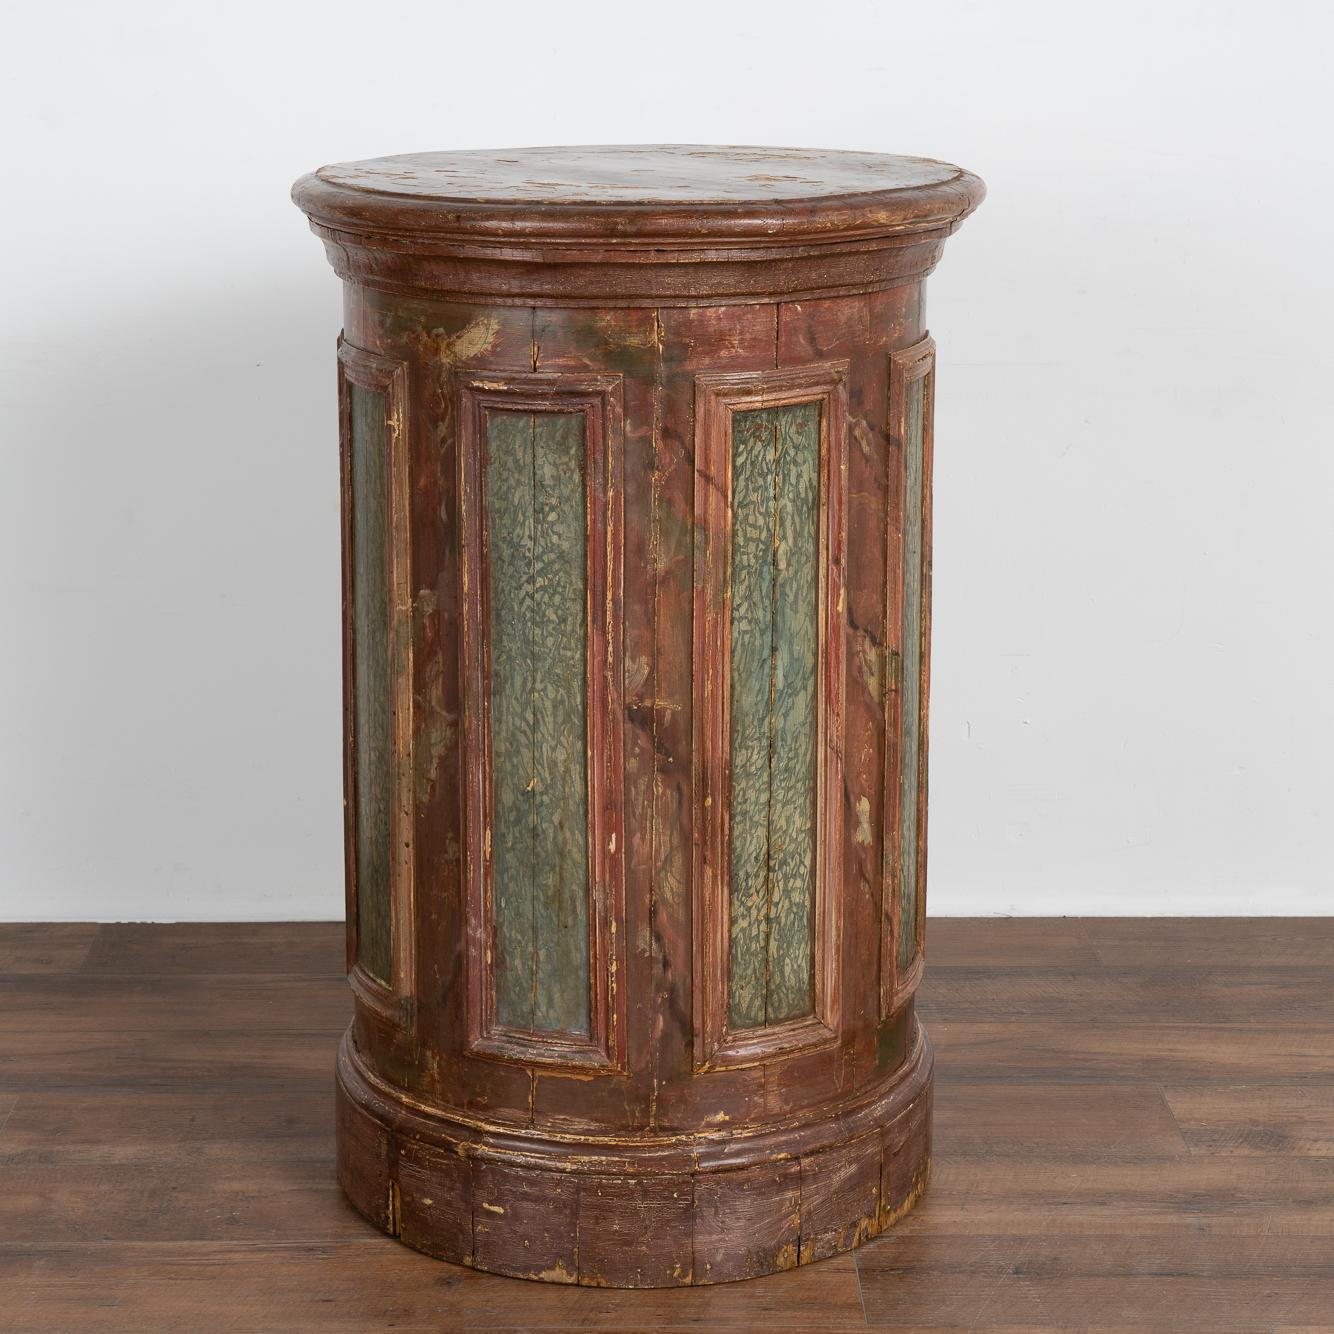 Swedish Antique Red Painted Wood Display Pedestal from Sweden, circa 1840-1860 For Sale